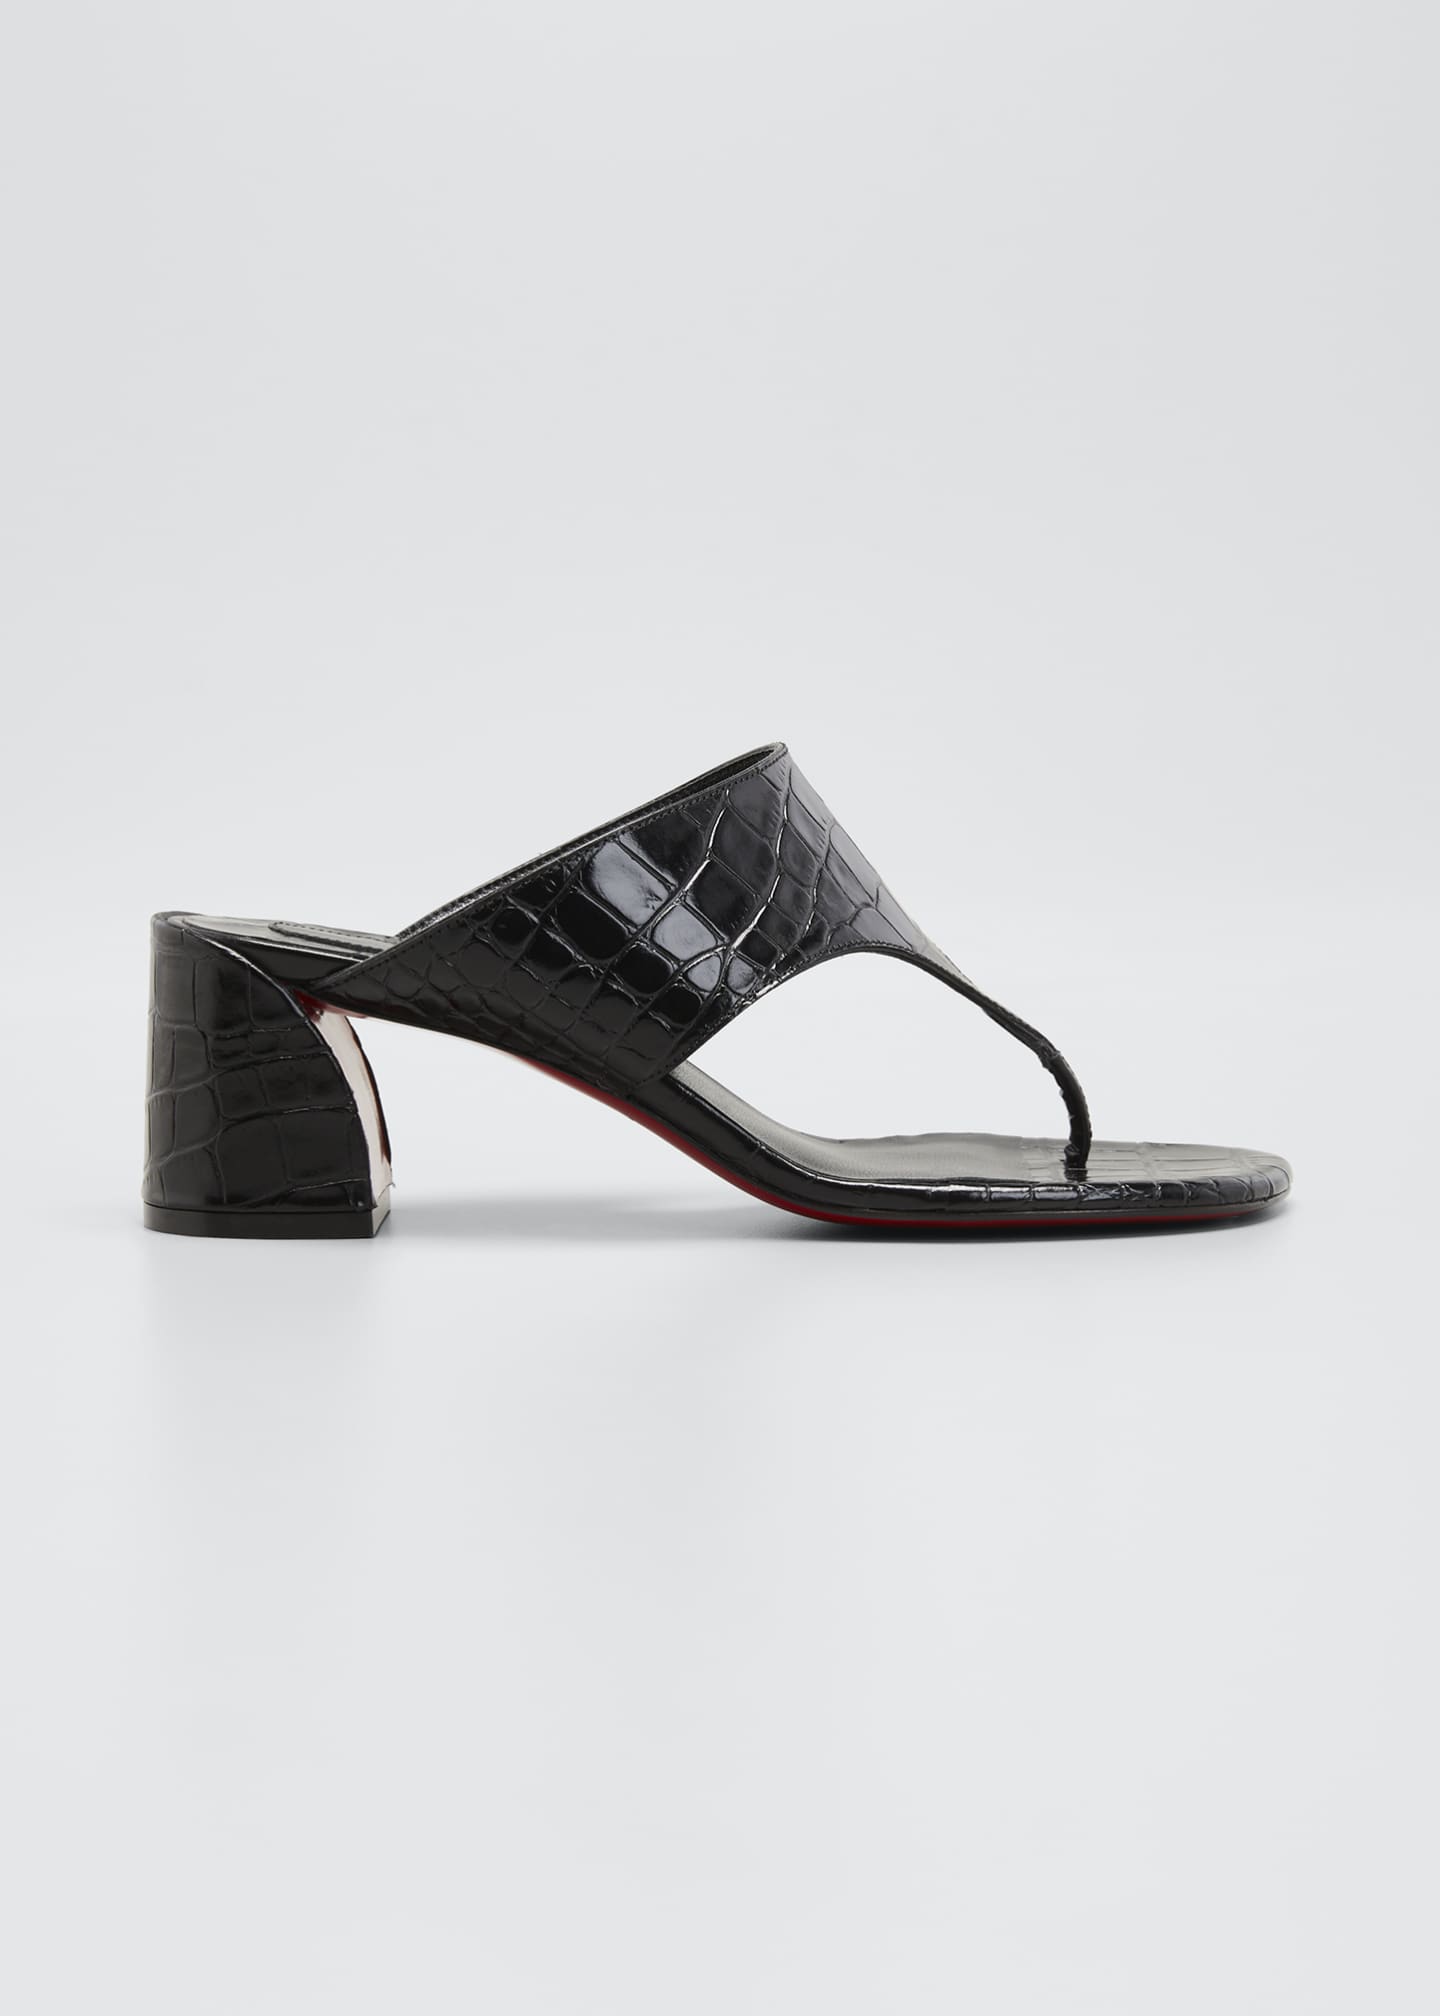 Christian Louboutin Egyptic 55mm Red Sole Slide Sandals - Bergdorf 